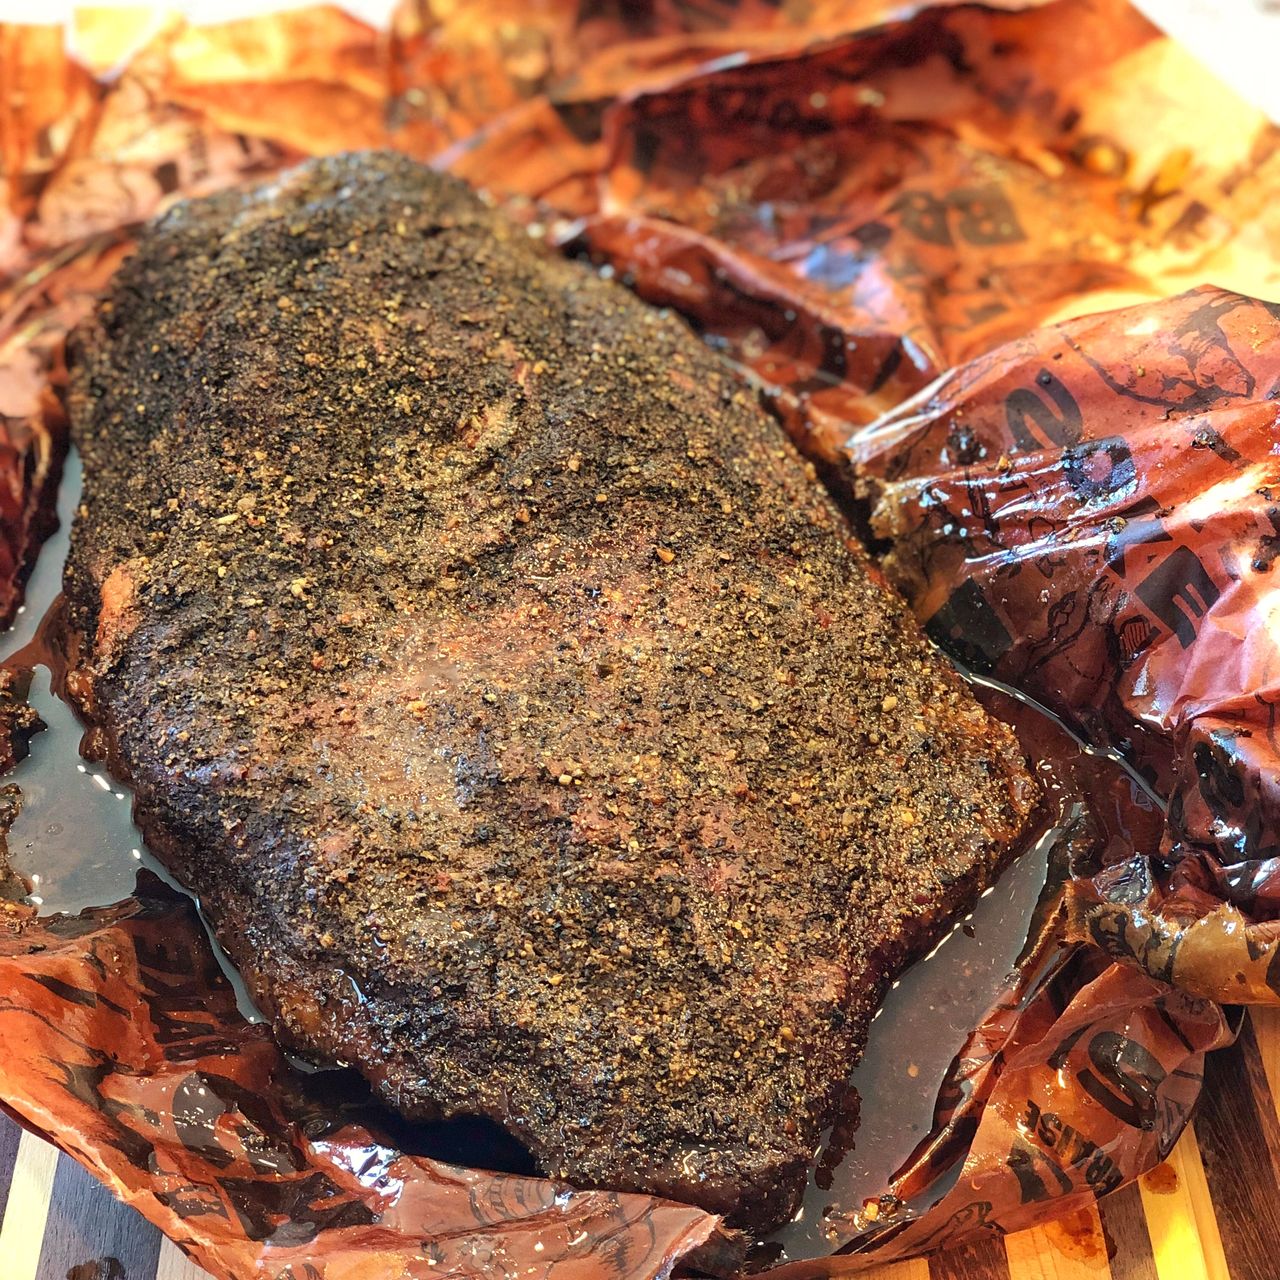 Finished smoked beef brisket